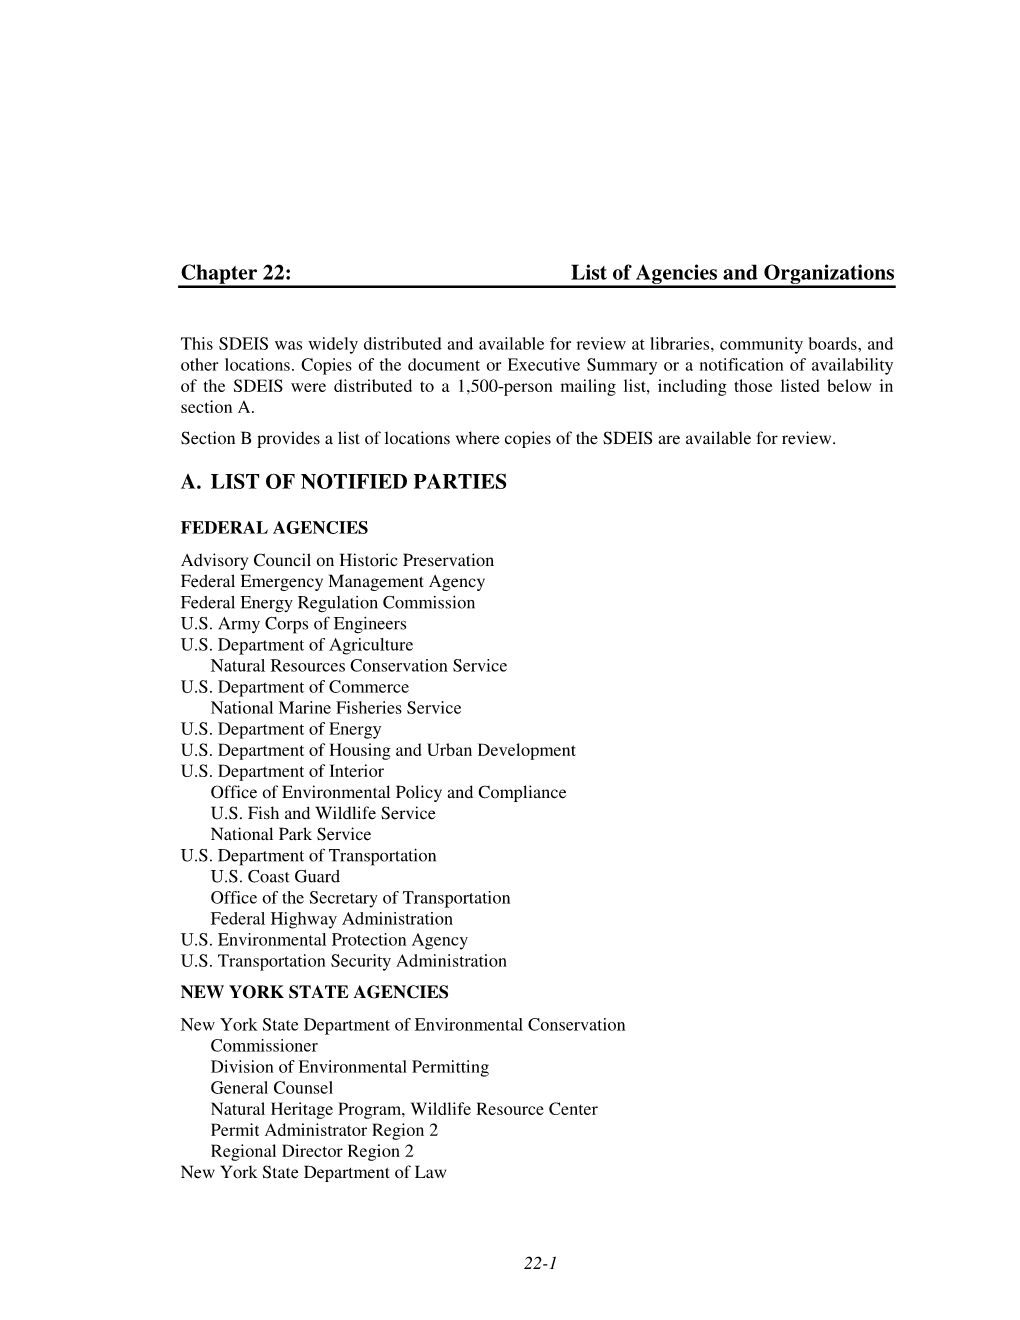 Chapter 22: List of Agencies and Organizations